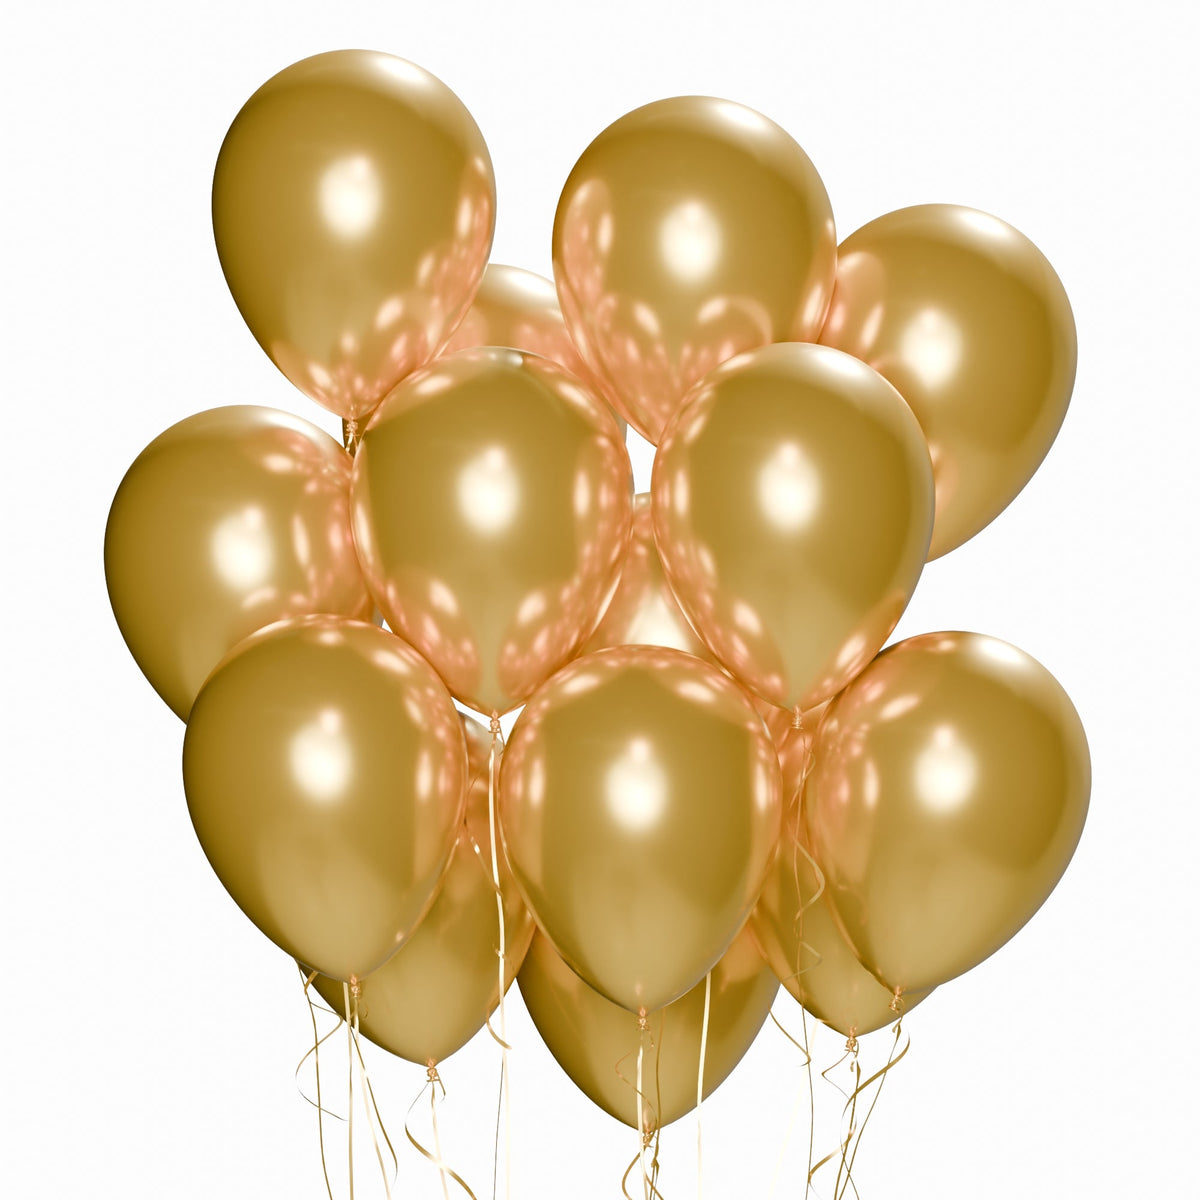 WIDE OCEAN INTERNATIONAL TRADE BEIJING CO., LTD Balloons Gold Latex Balloon 12 Inches, Chrome Collection, 15 Count 810064198410